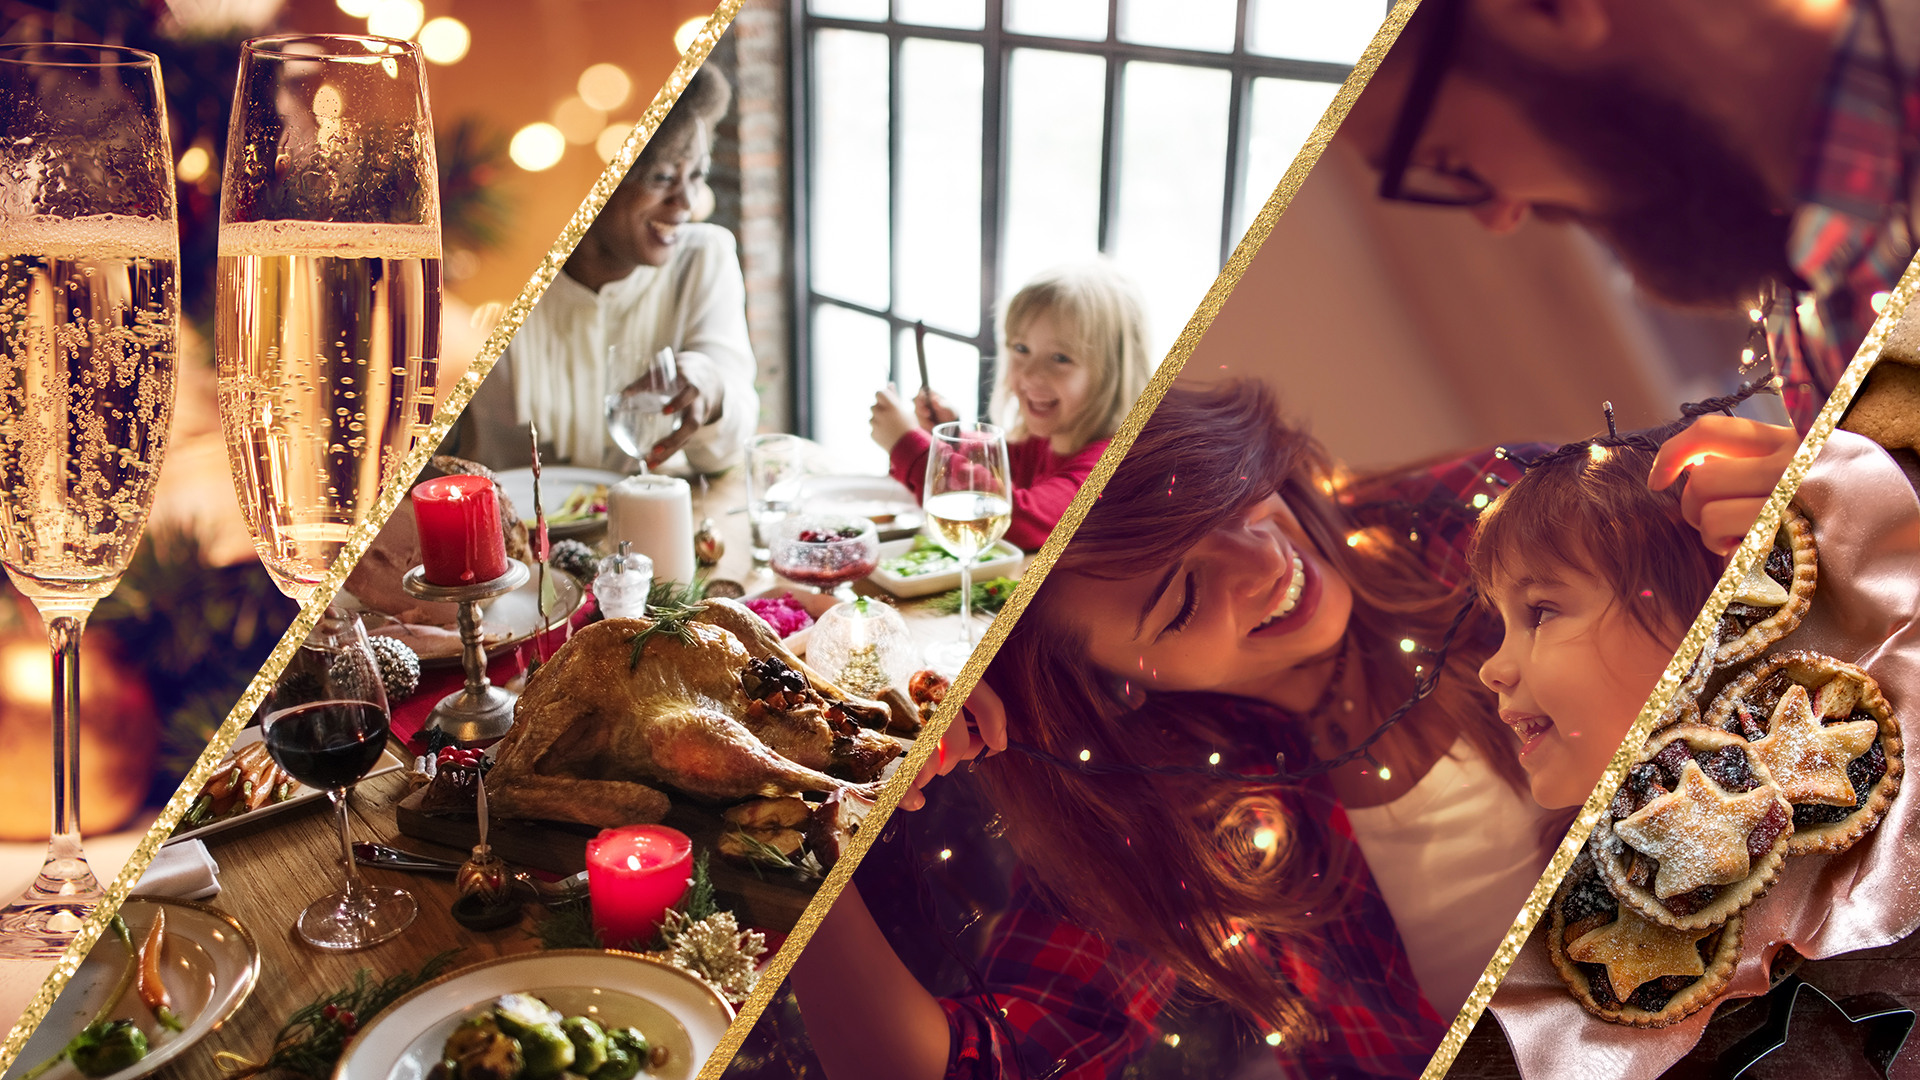 Top tips for hosting at Christmas